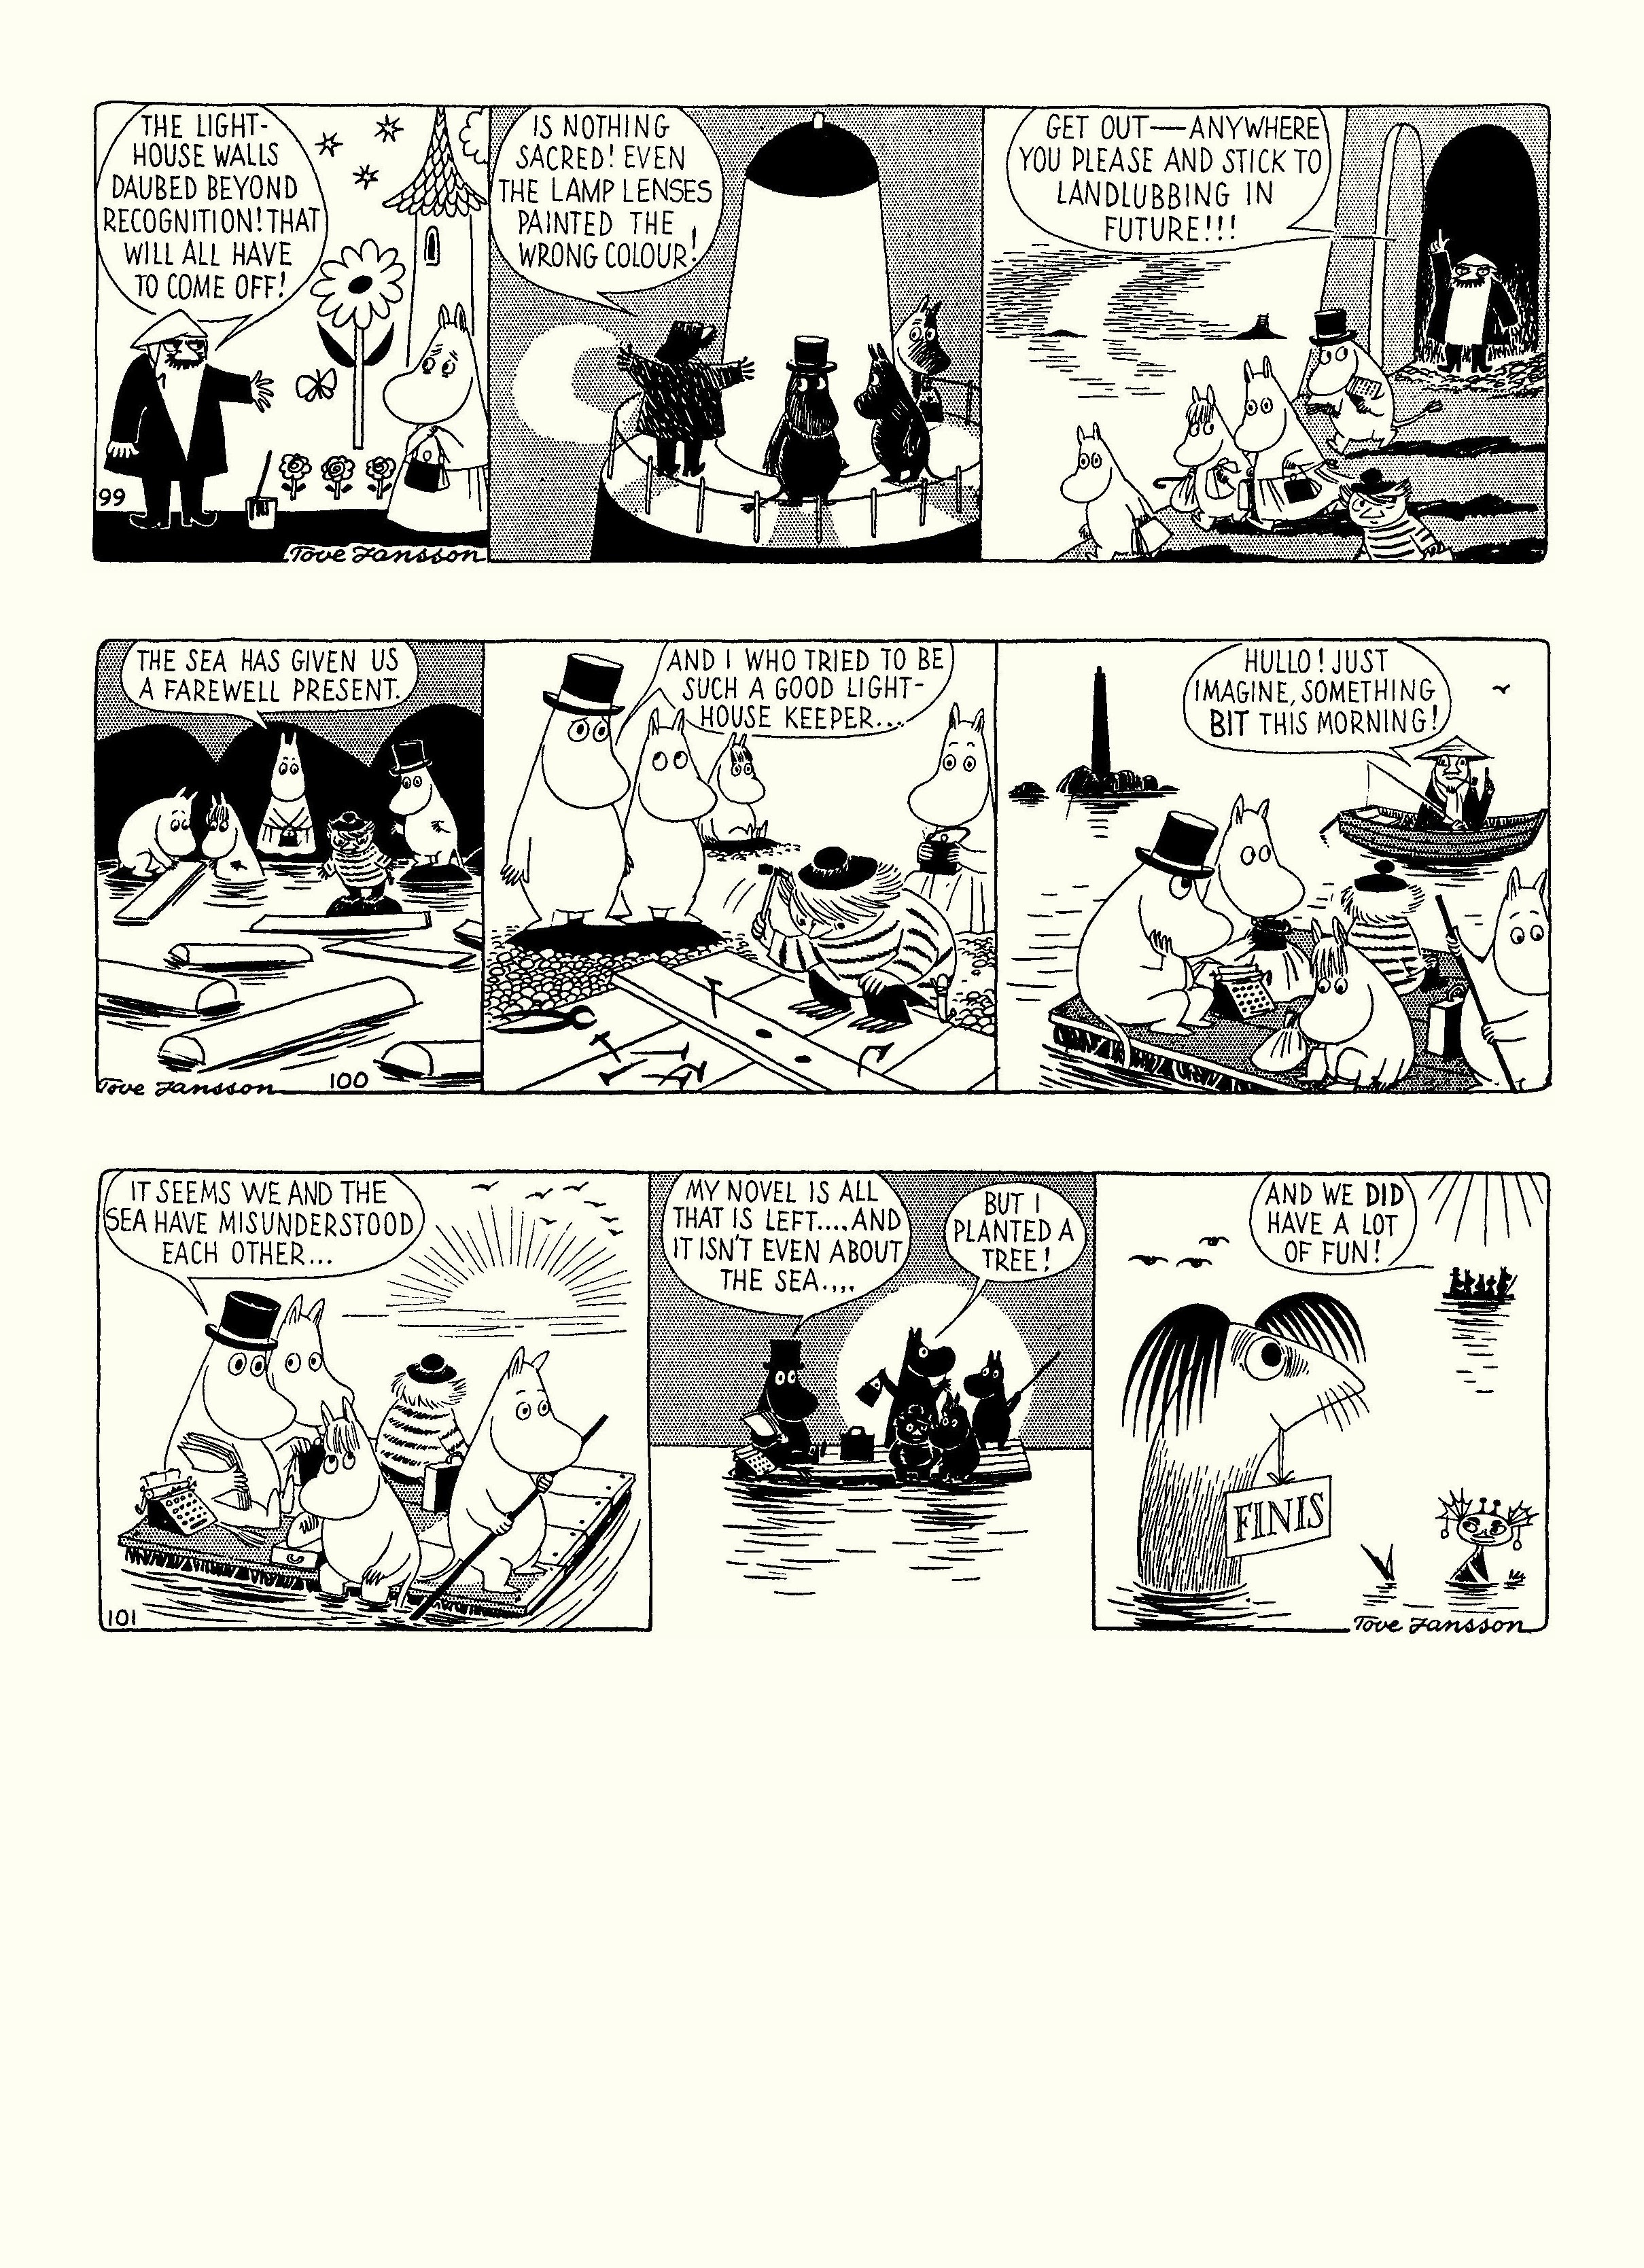 Read online Moomin: The Complete Tove Jansson Comic Strip comic -  Issue # TPB 3 - 80